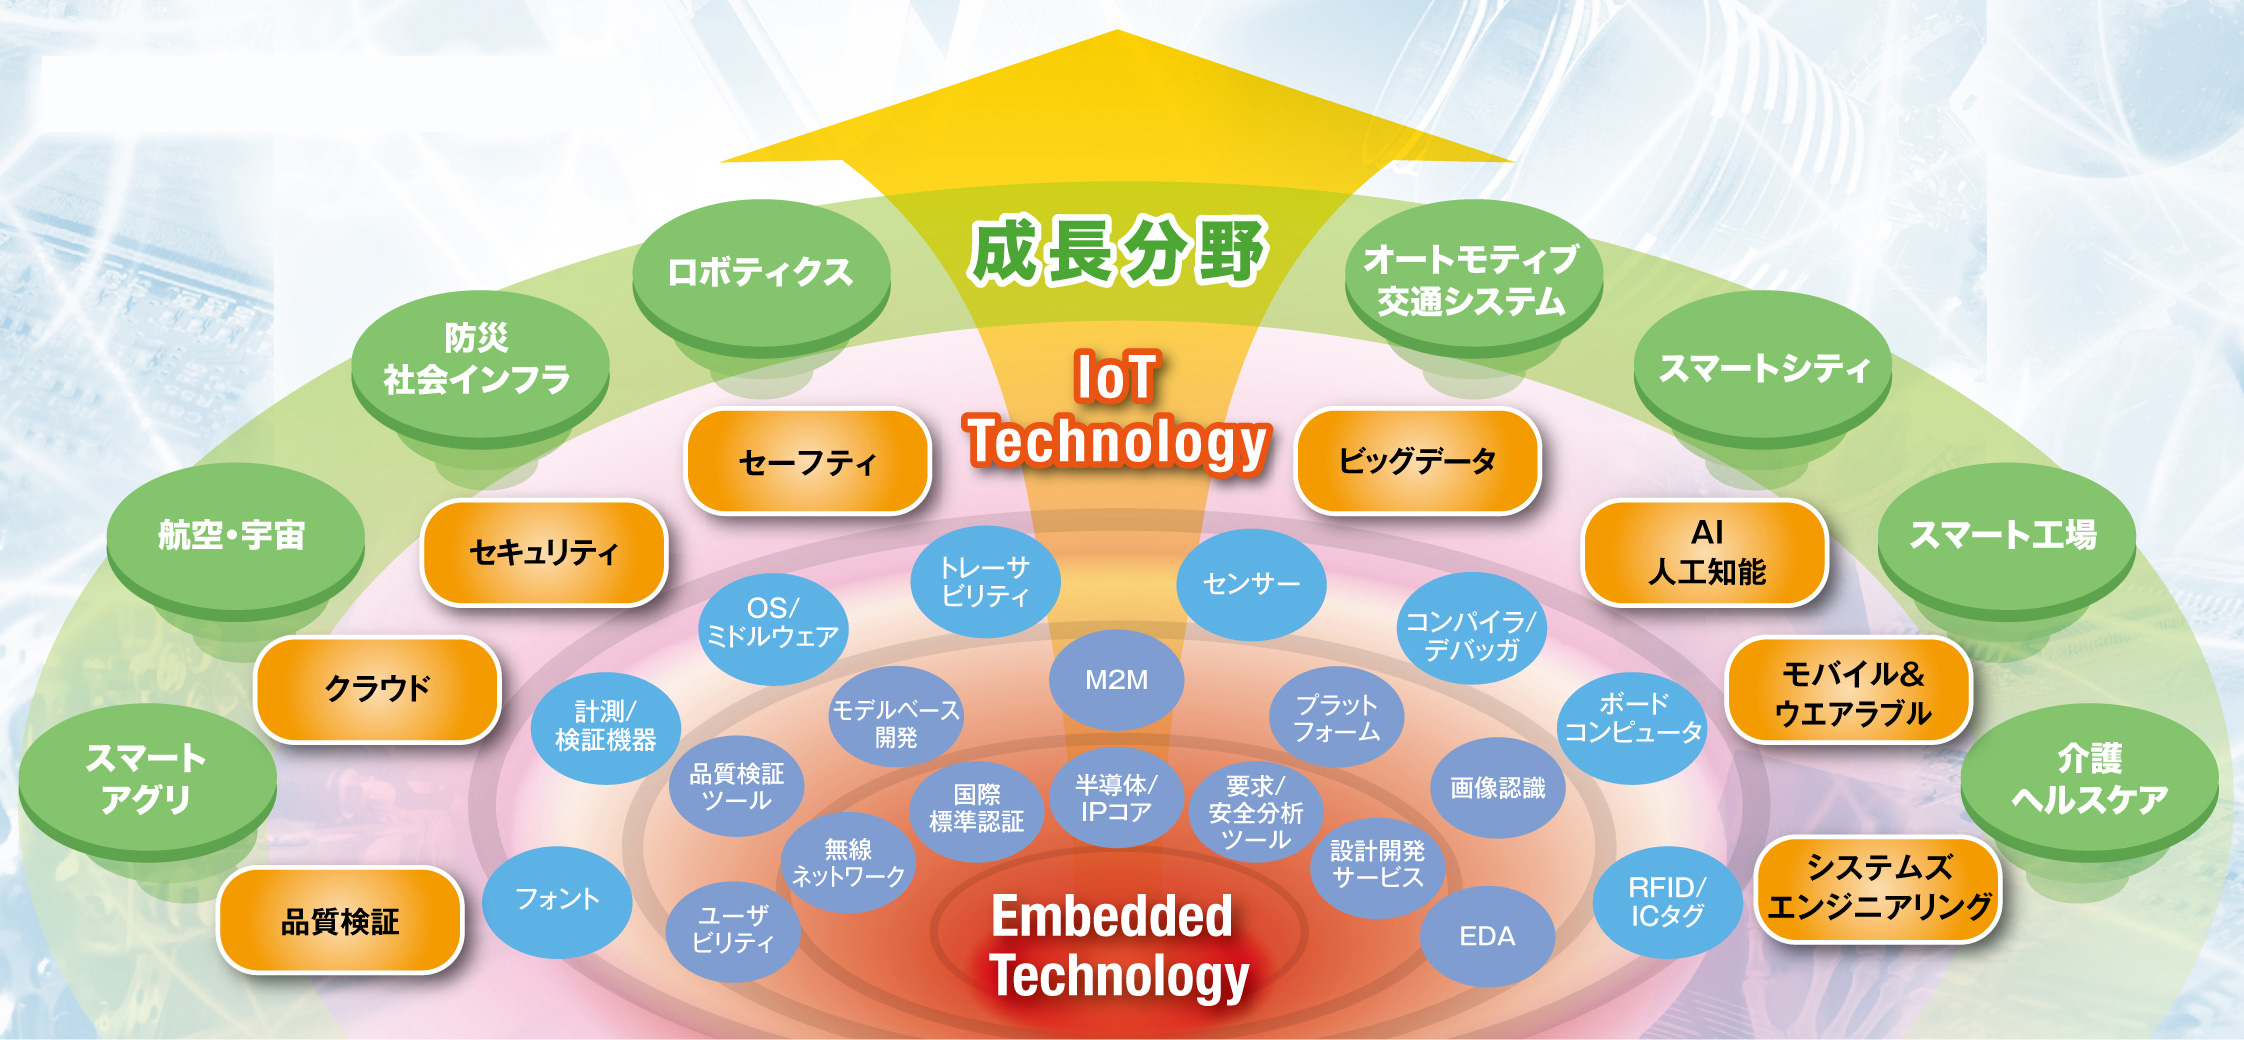 ET West＆IoT Technology West コンセプト図